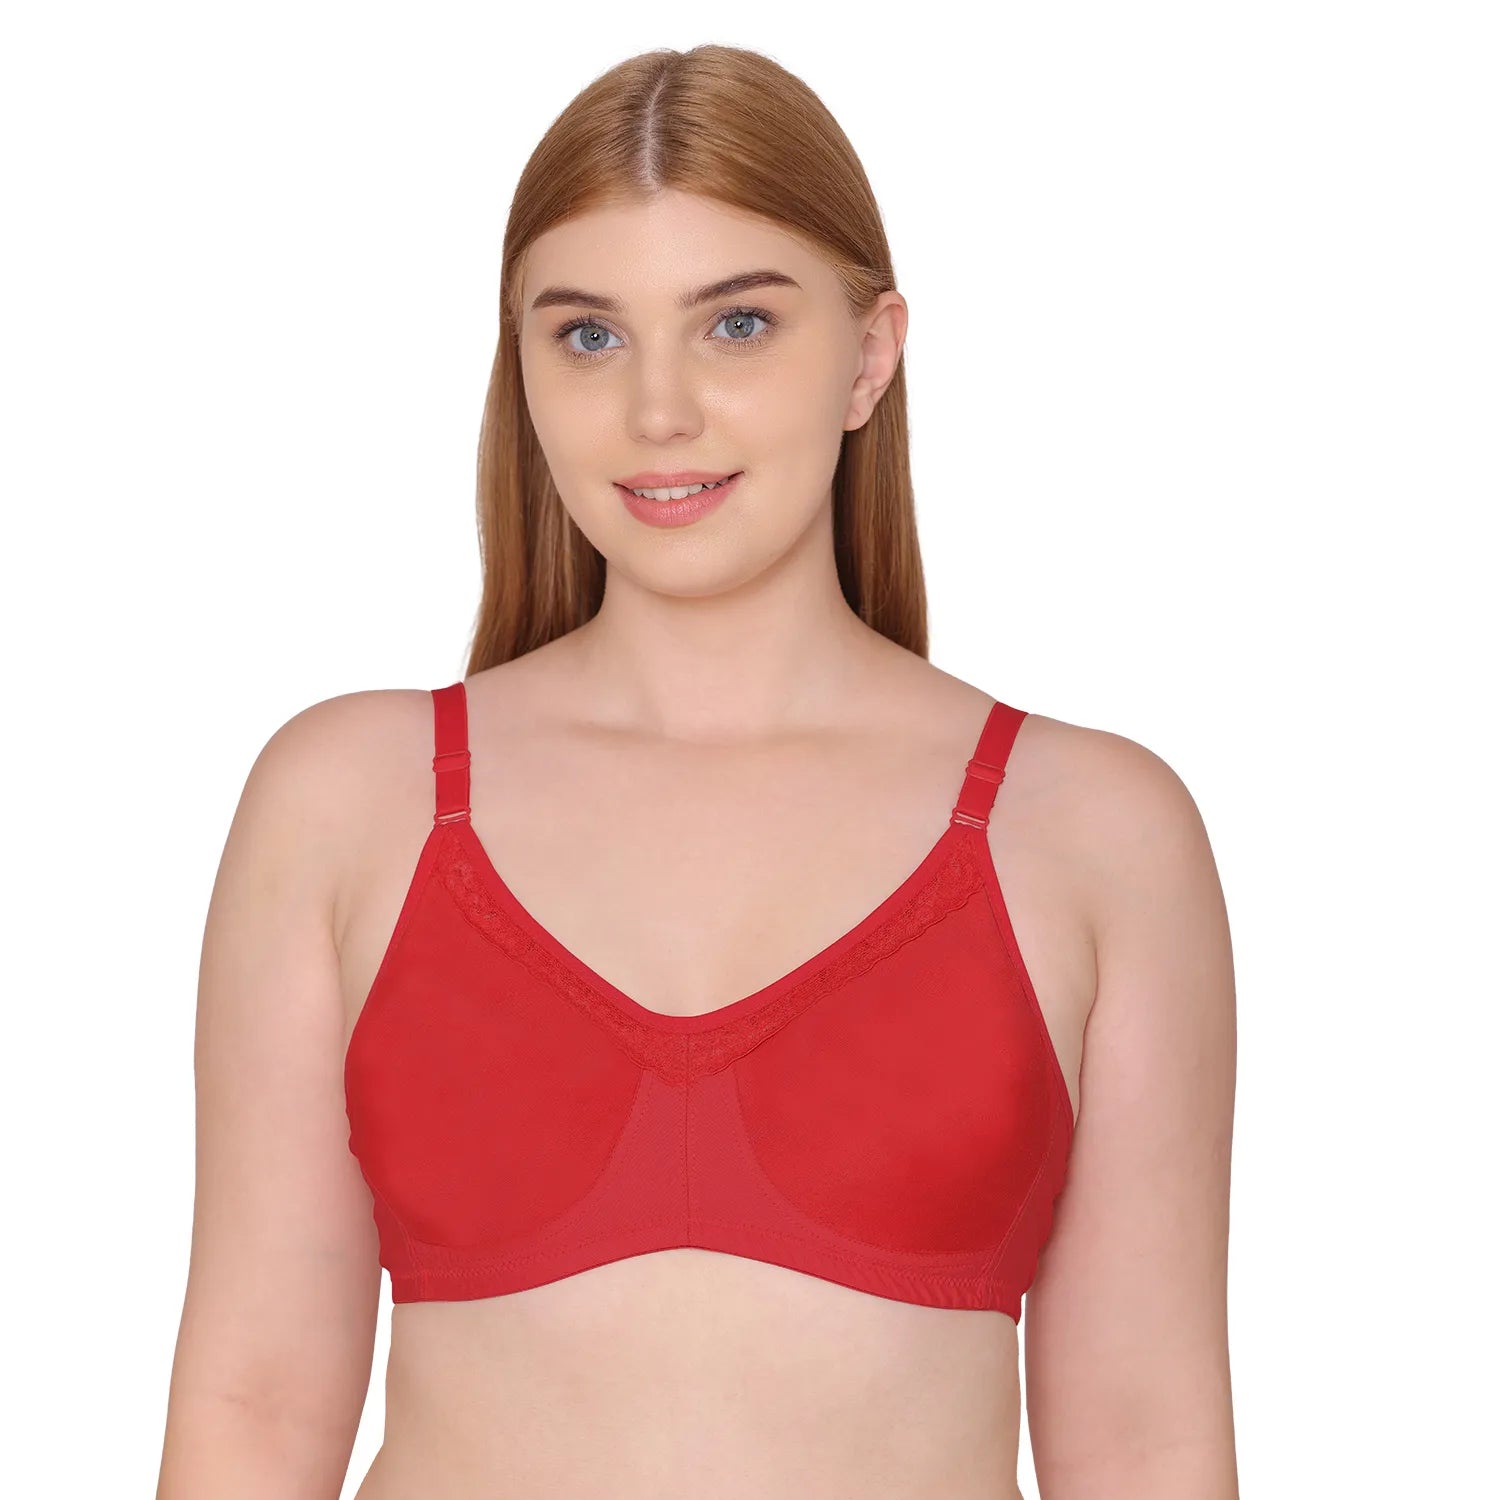 Souminie SEAMLESS Double Layered Non-Wired Full Coverage Bra - 100% Co –  Tweens